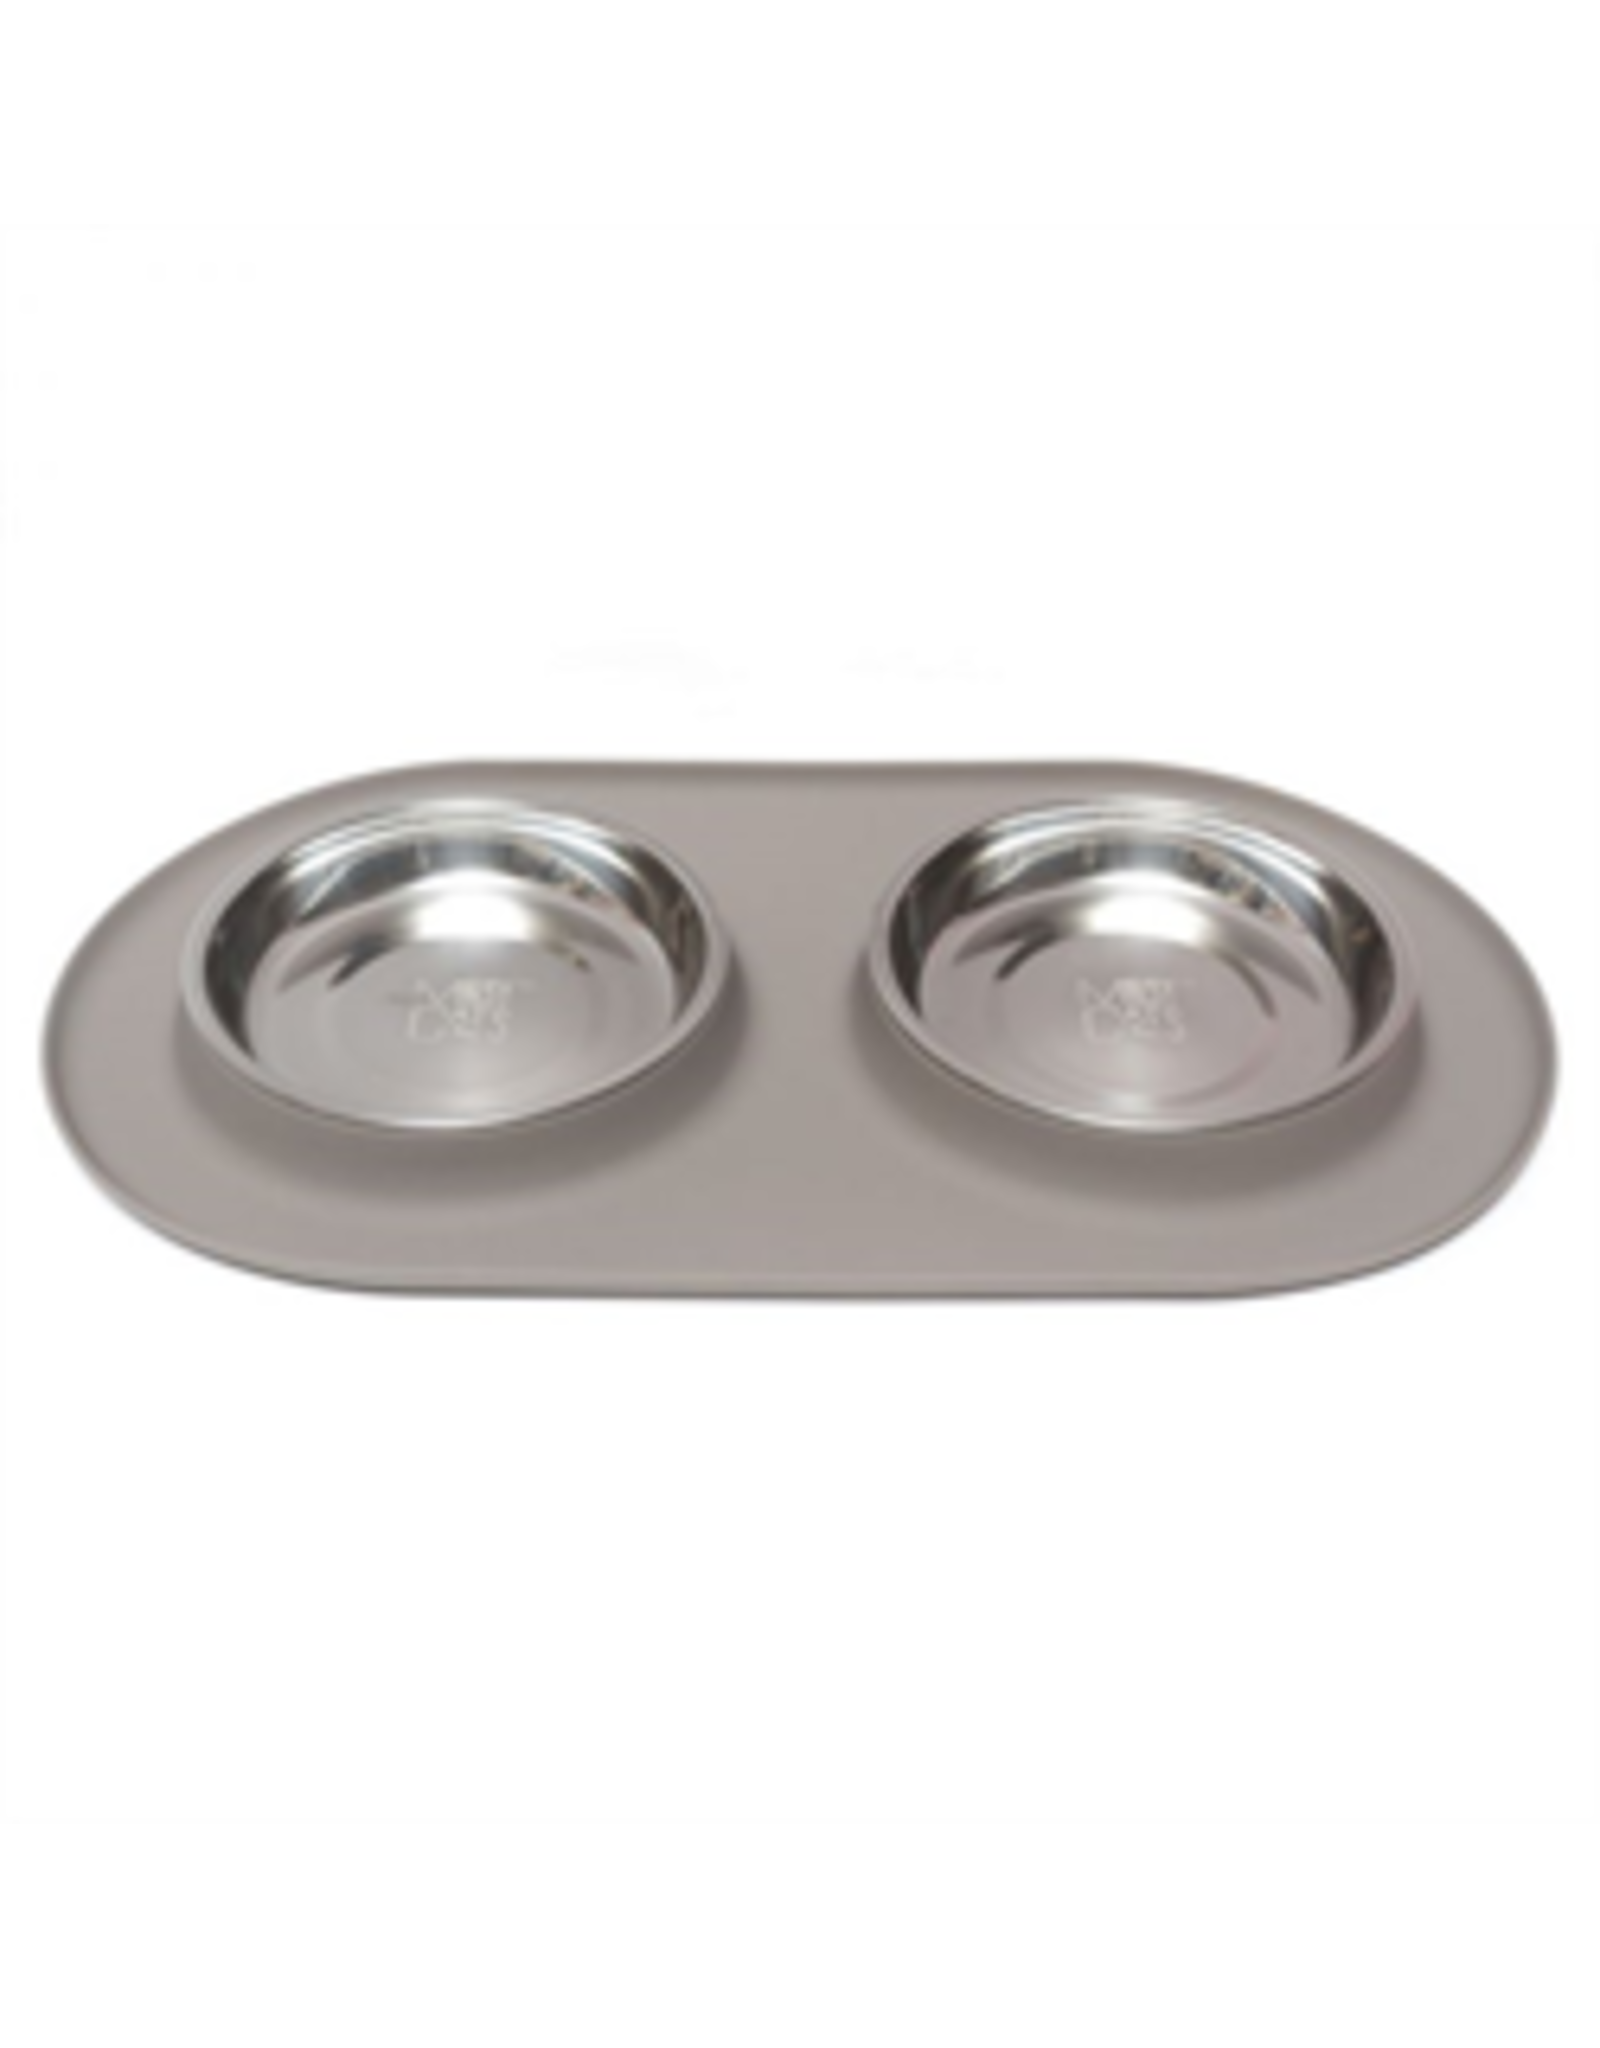 Messy Cats Double Silicone Feeder with Stainless Saucer Bowl - 1.75cups